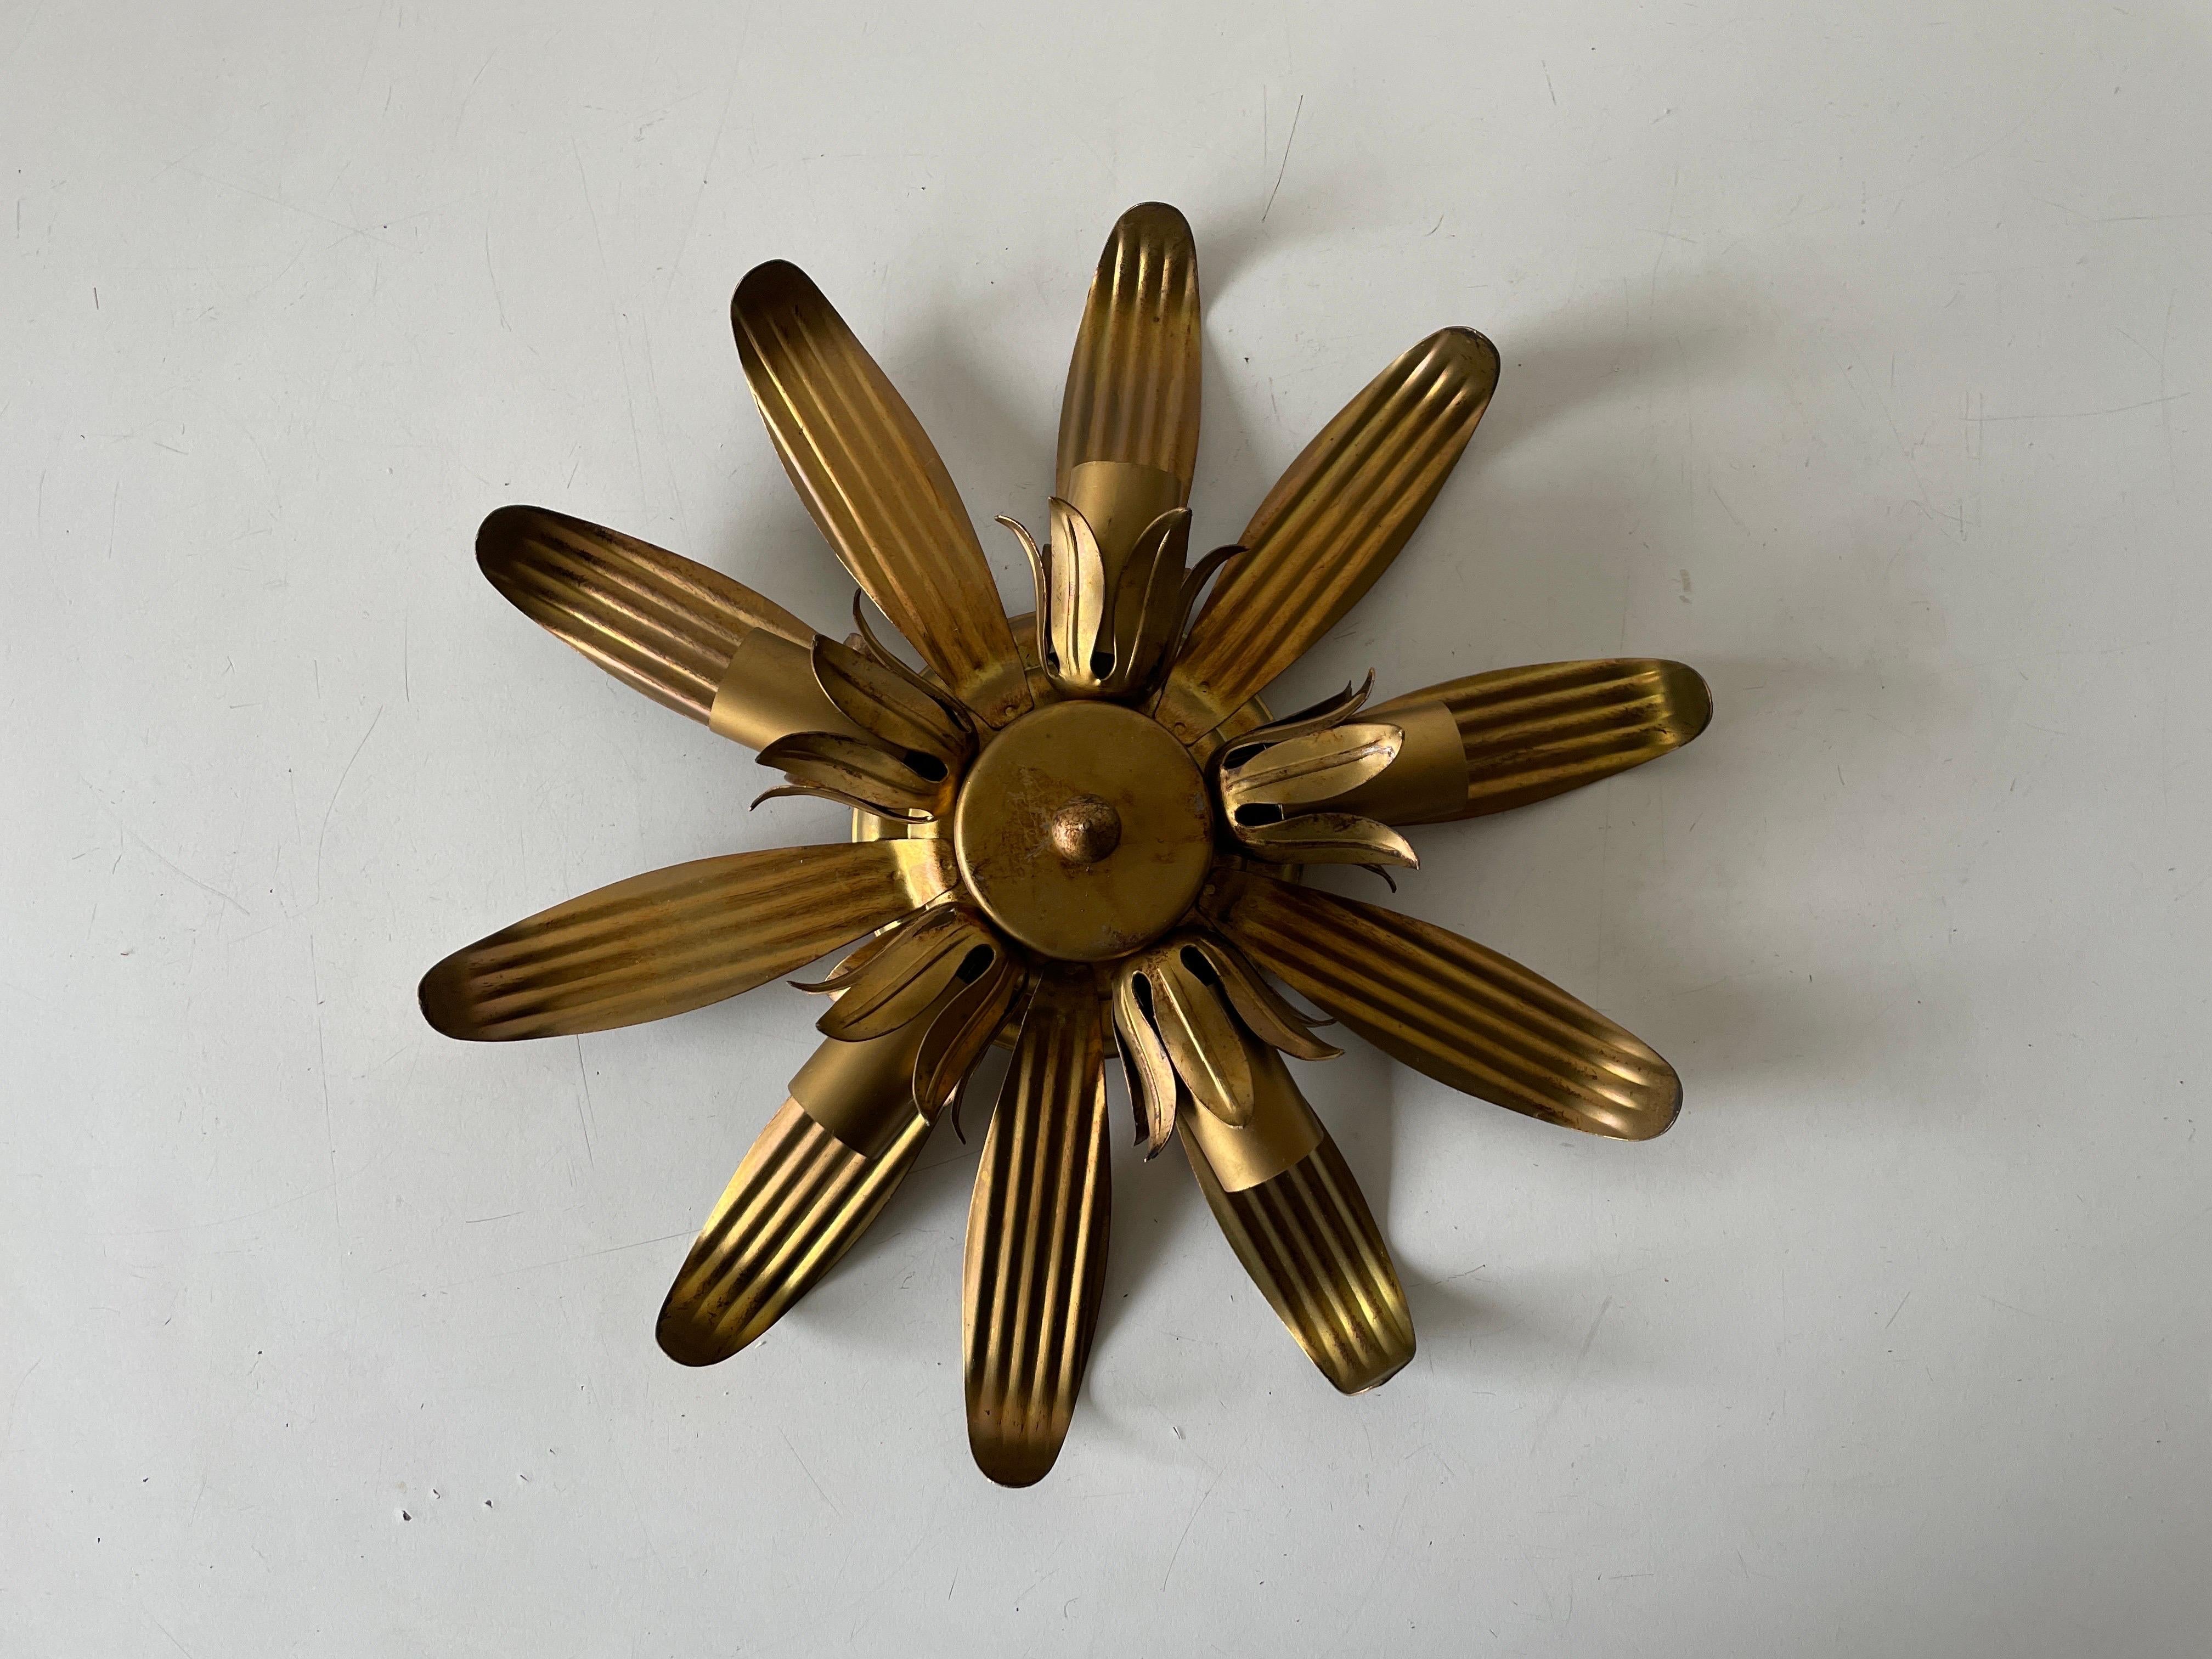 Flower Design Brass Flush Mounts Wall Lamps by Schröder Leuchten, 1960s, Germany

Lampshade is in very good vintage condition.

This lamp works with 6xE14 light bulbs. 
Wired and suitable to use with 220V and 110V for all